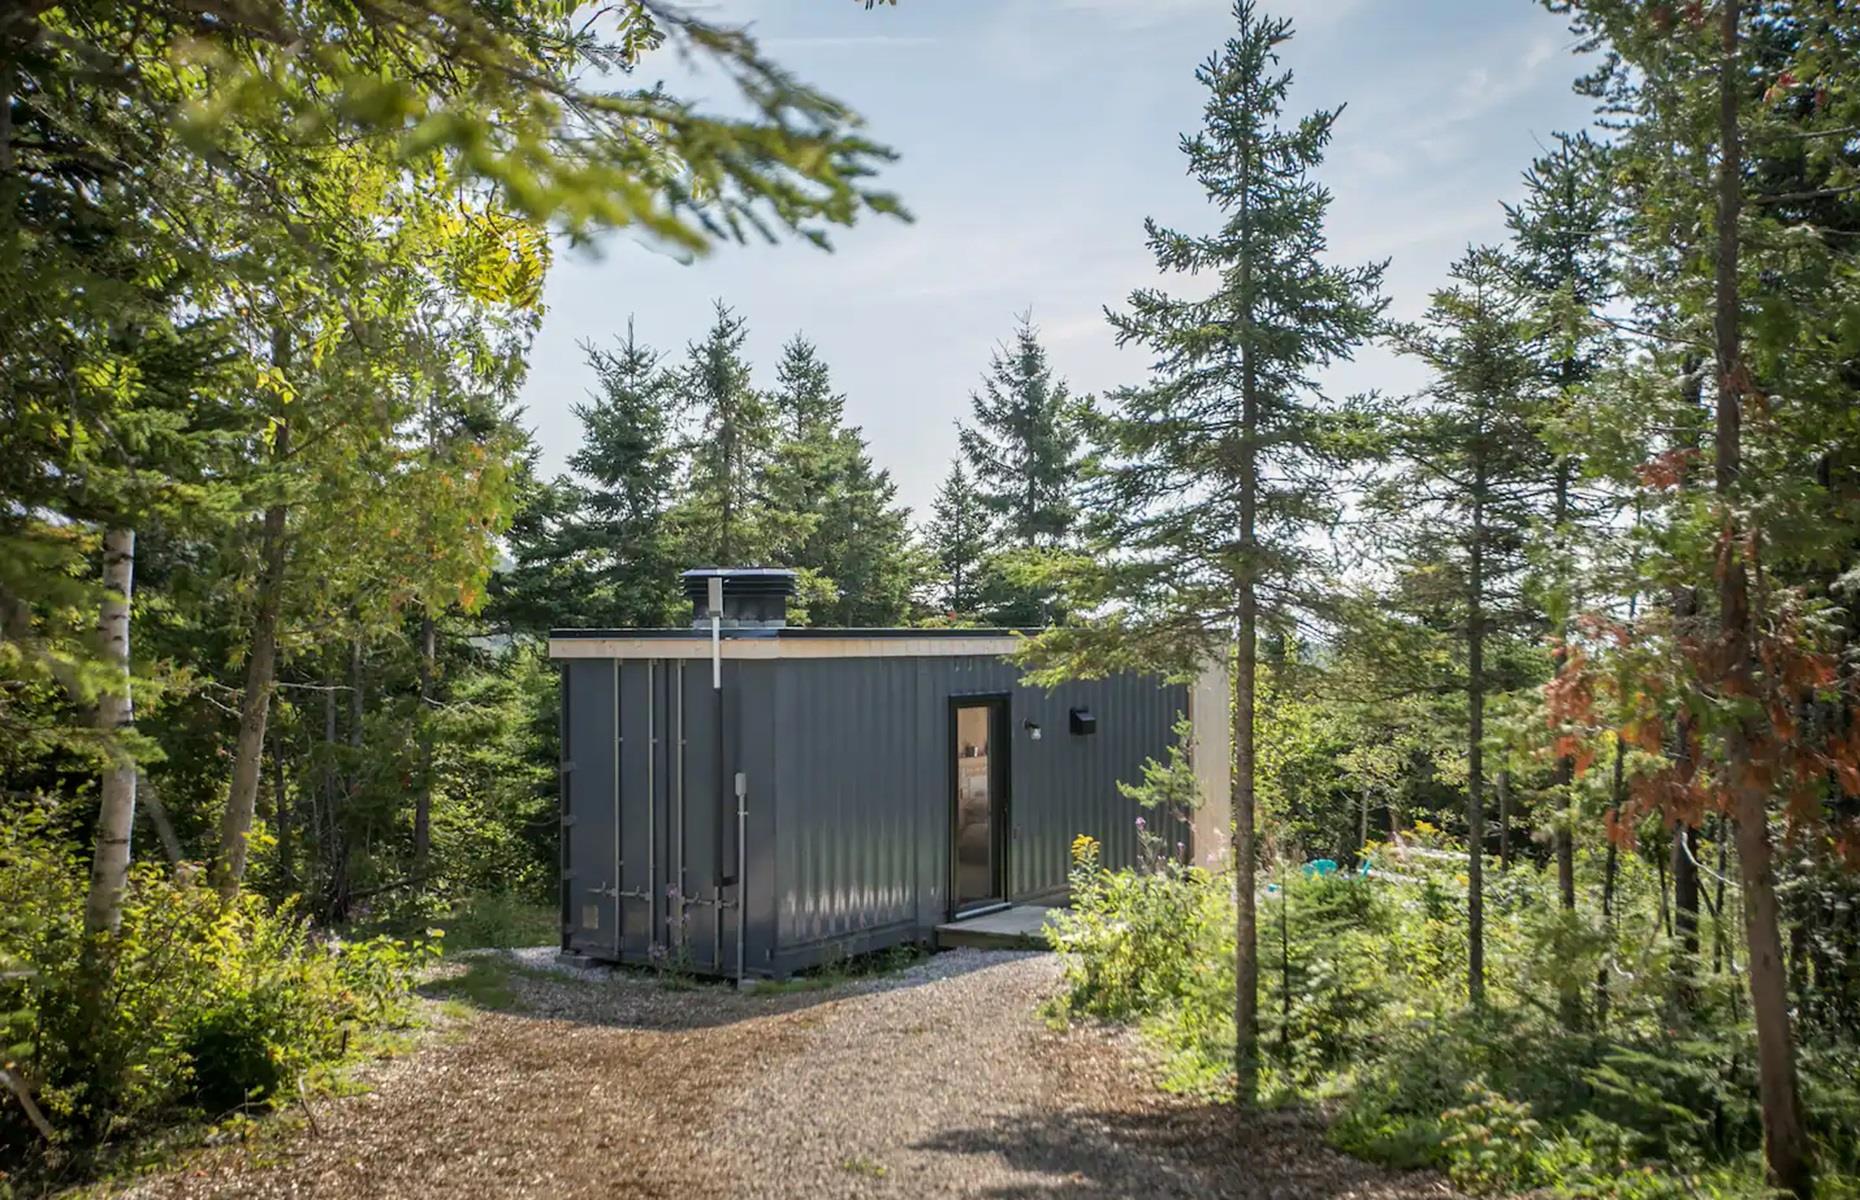 <p>Over in the Les Éboulements municipality of Quebec, you'll find this impressive tiny home – formed from a single steel shipping container. The cool converted home is known as <a href="https://www.airbnb.ca/rooms/647888755288898849?adults=1&category_tag=Tag%3A8186&children=0&enable_m3_private_room=true&infants=0&pets=0&photo_id=1422150332&search_mode=flex_destinations_search&check_in=2024-02-18&check_out=2024-02-23&source_impression_id=p3_1706100028_y3FJA%2BLwmoUla%2BRI&previous_page_section_name=1000&federated_search_id=9300aedf-73df-4331-8d27-f241be0224f1">the Shiship</a> and is nestled inside a dense and tranquil forest.</p>